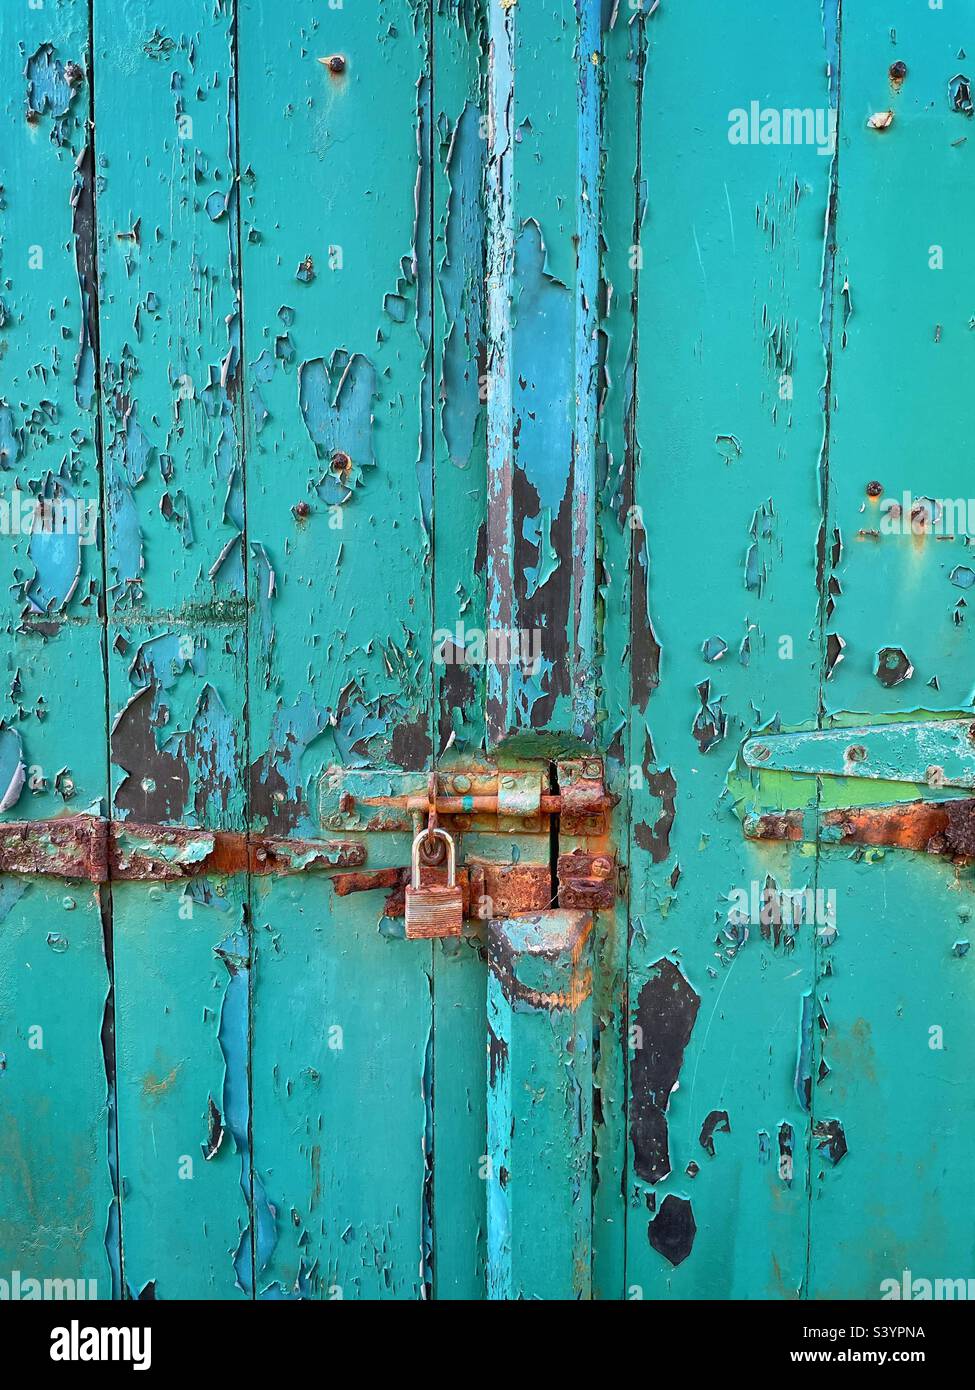 Rusty old padlock on a teal blue door with flaking paint. Stock Photo